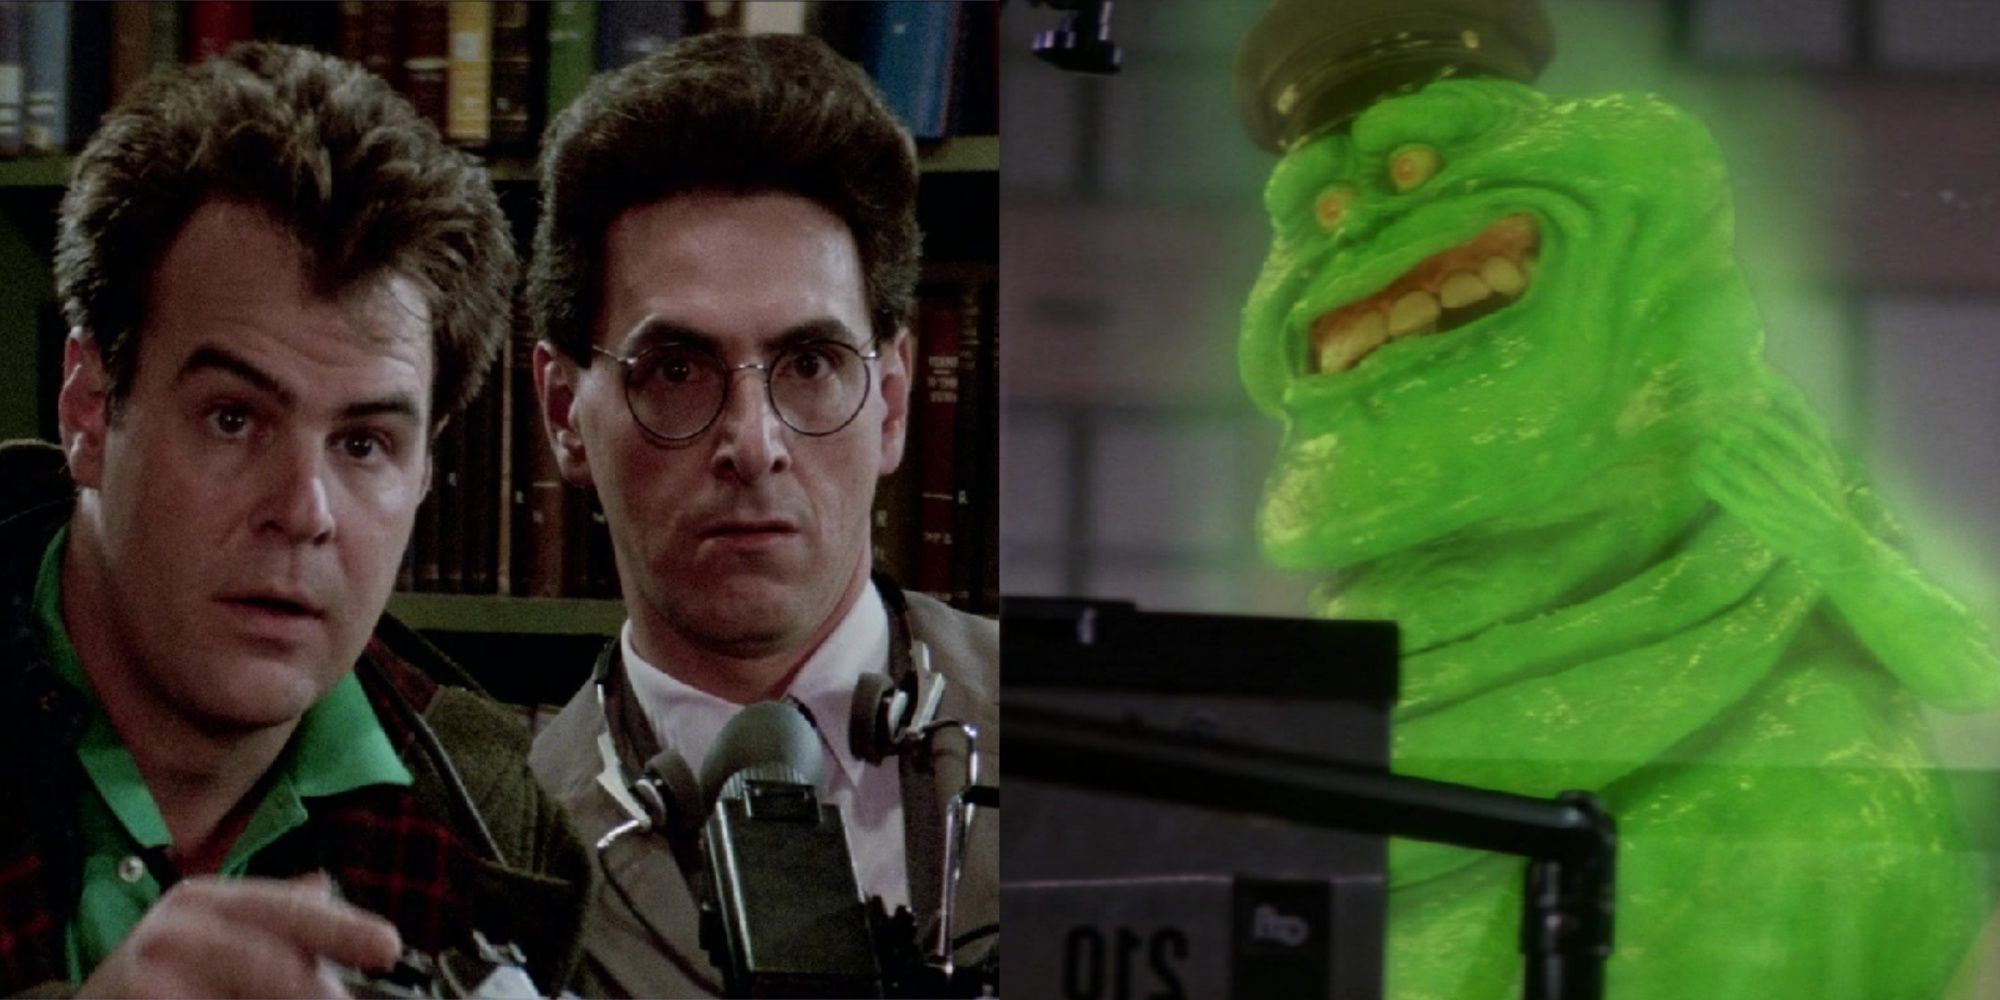 Ray and Egan on left, Slimer on right